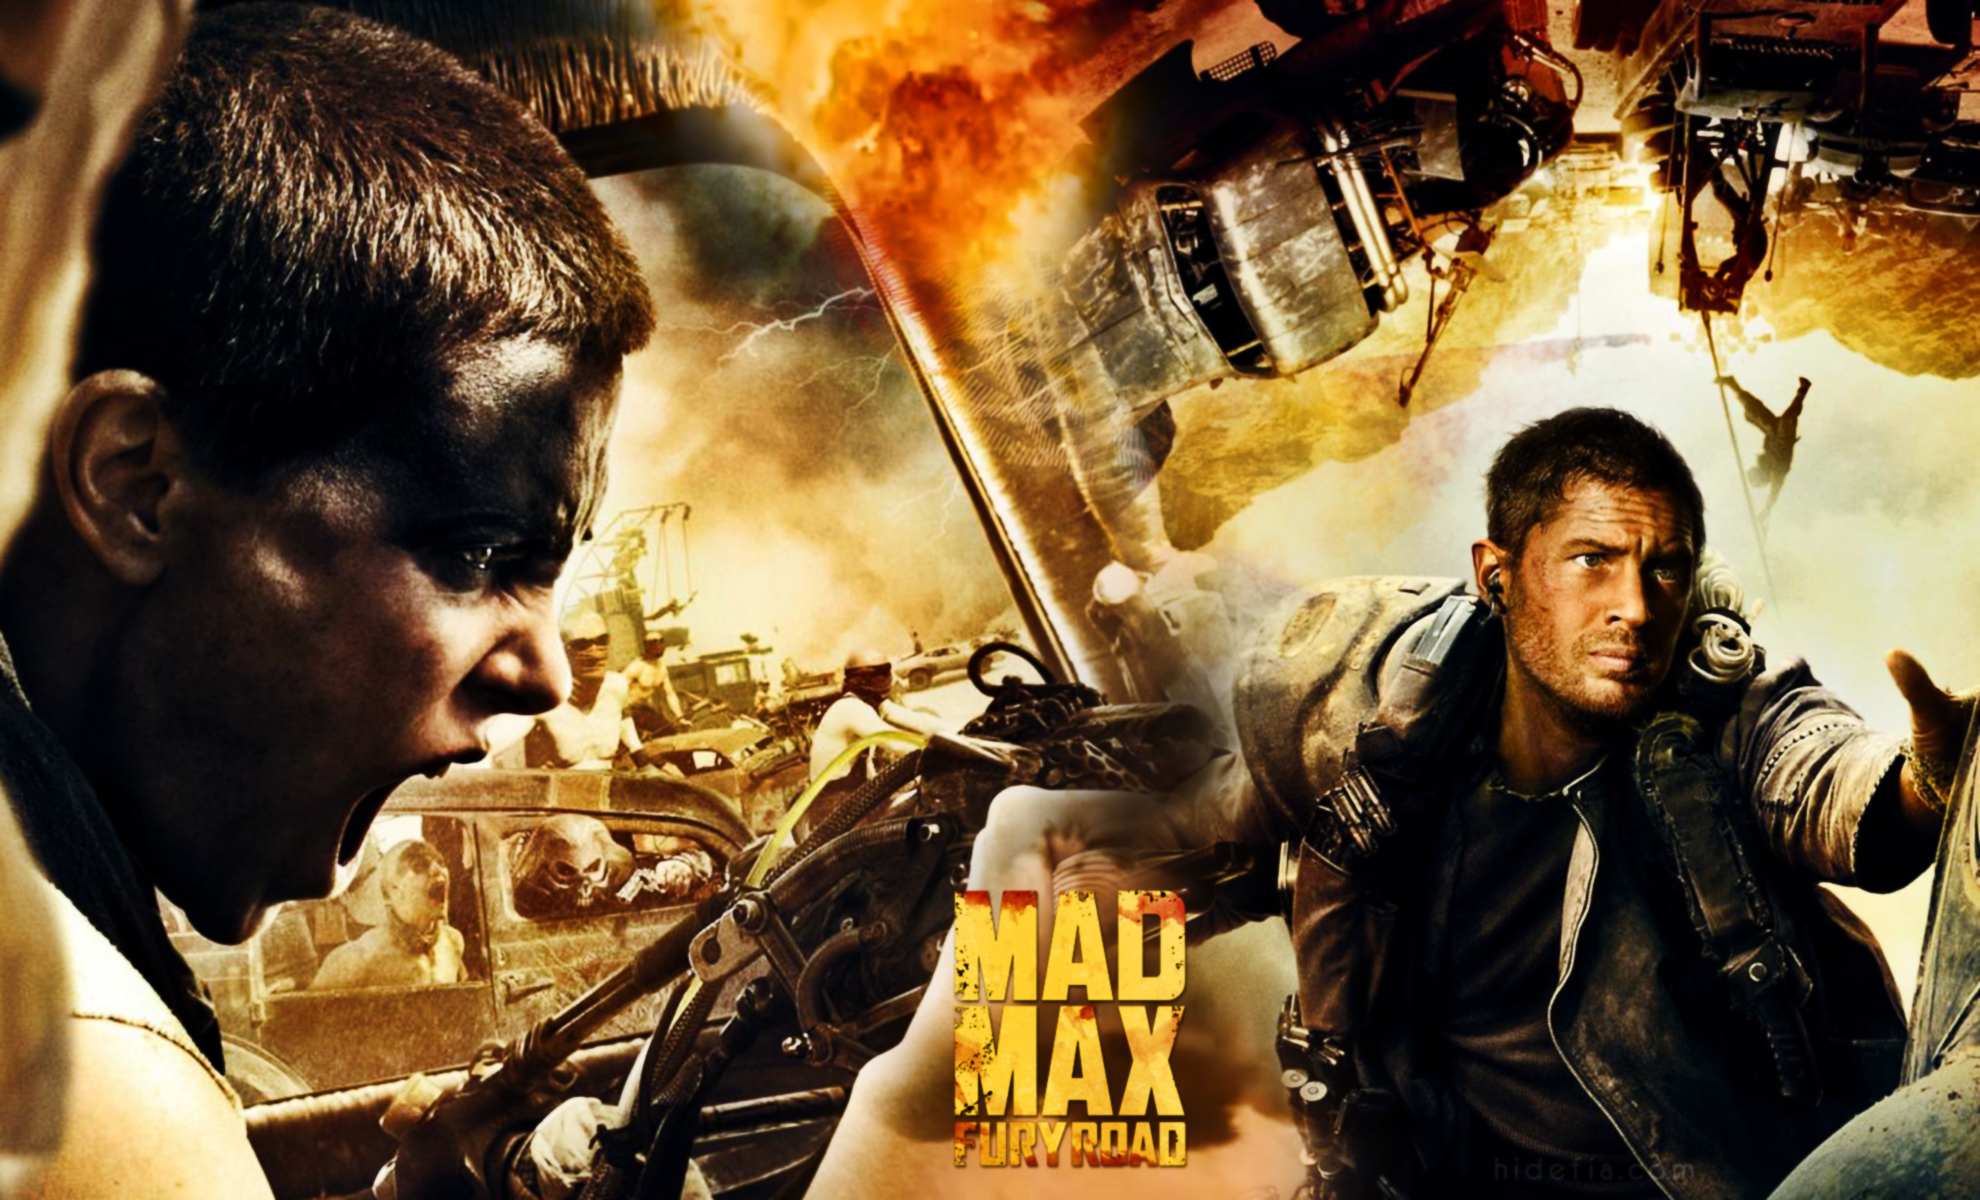 Download Mad Max Fury Road 2015 Fighting Movie HD Wallpaper Search